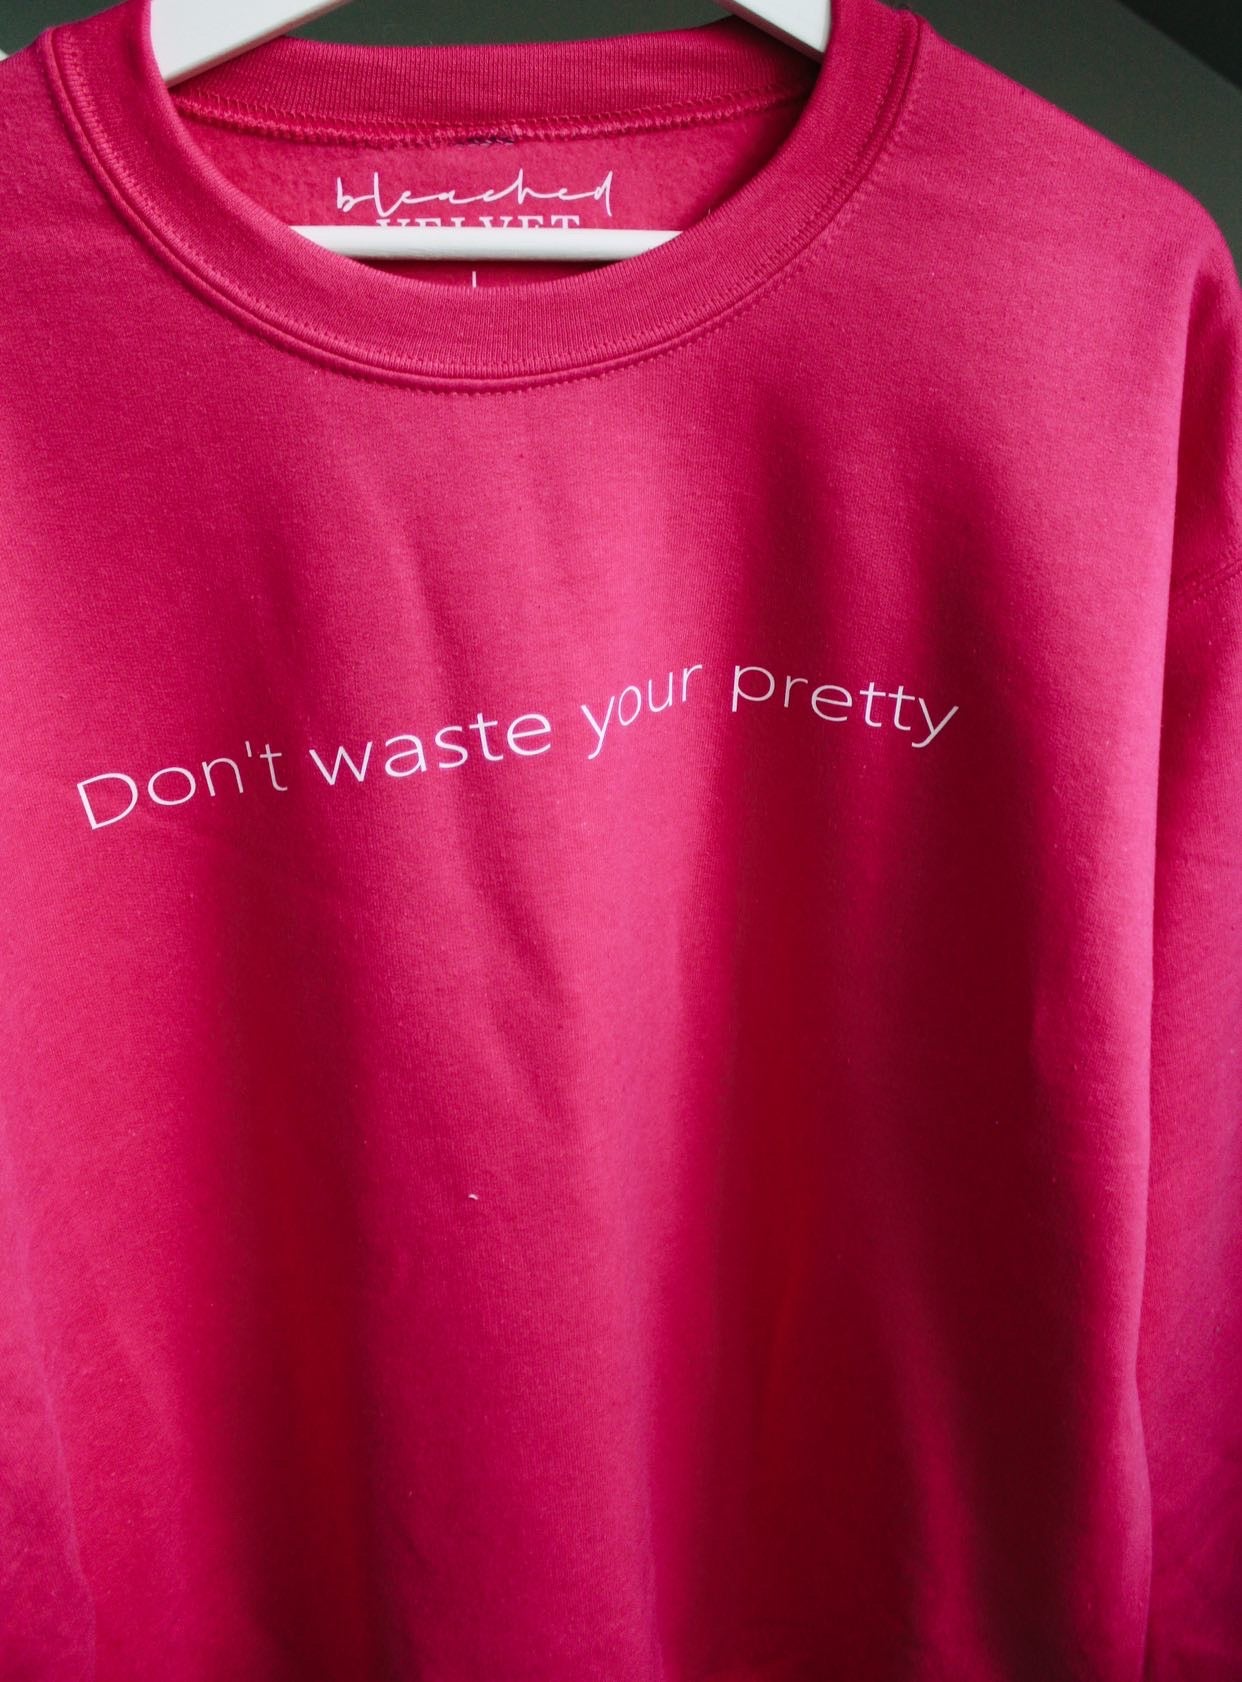 Don't Waste Your Pretty